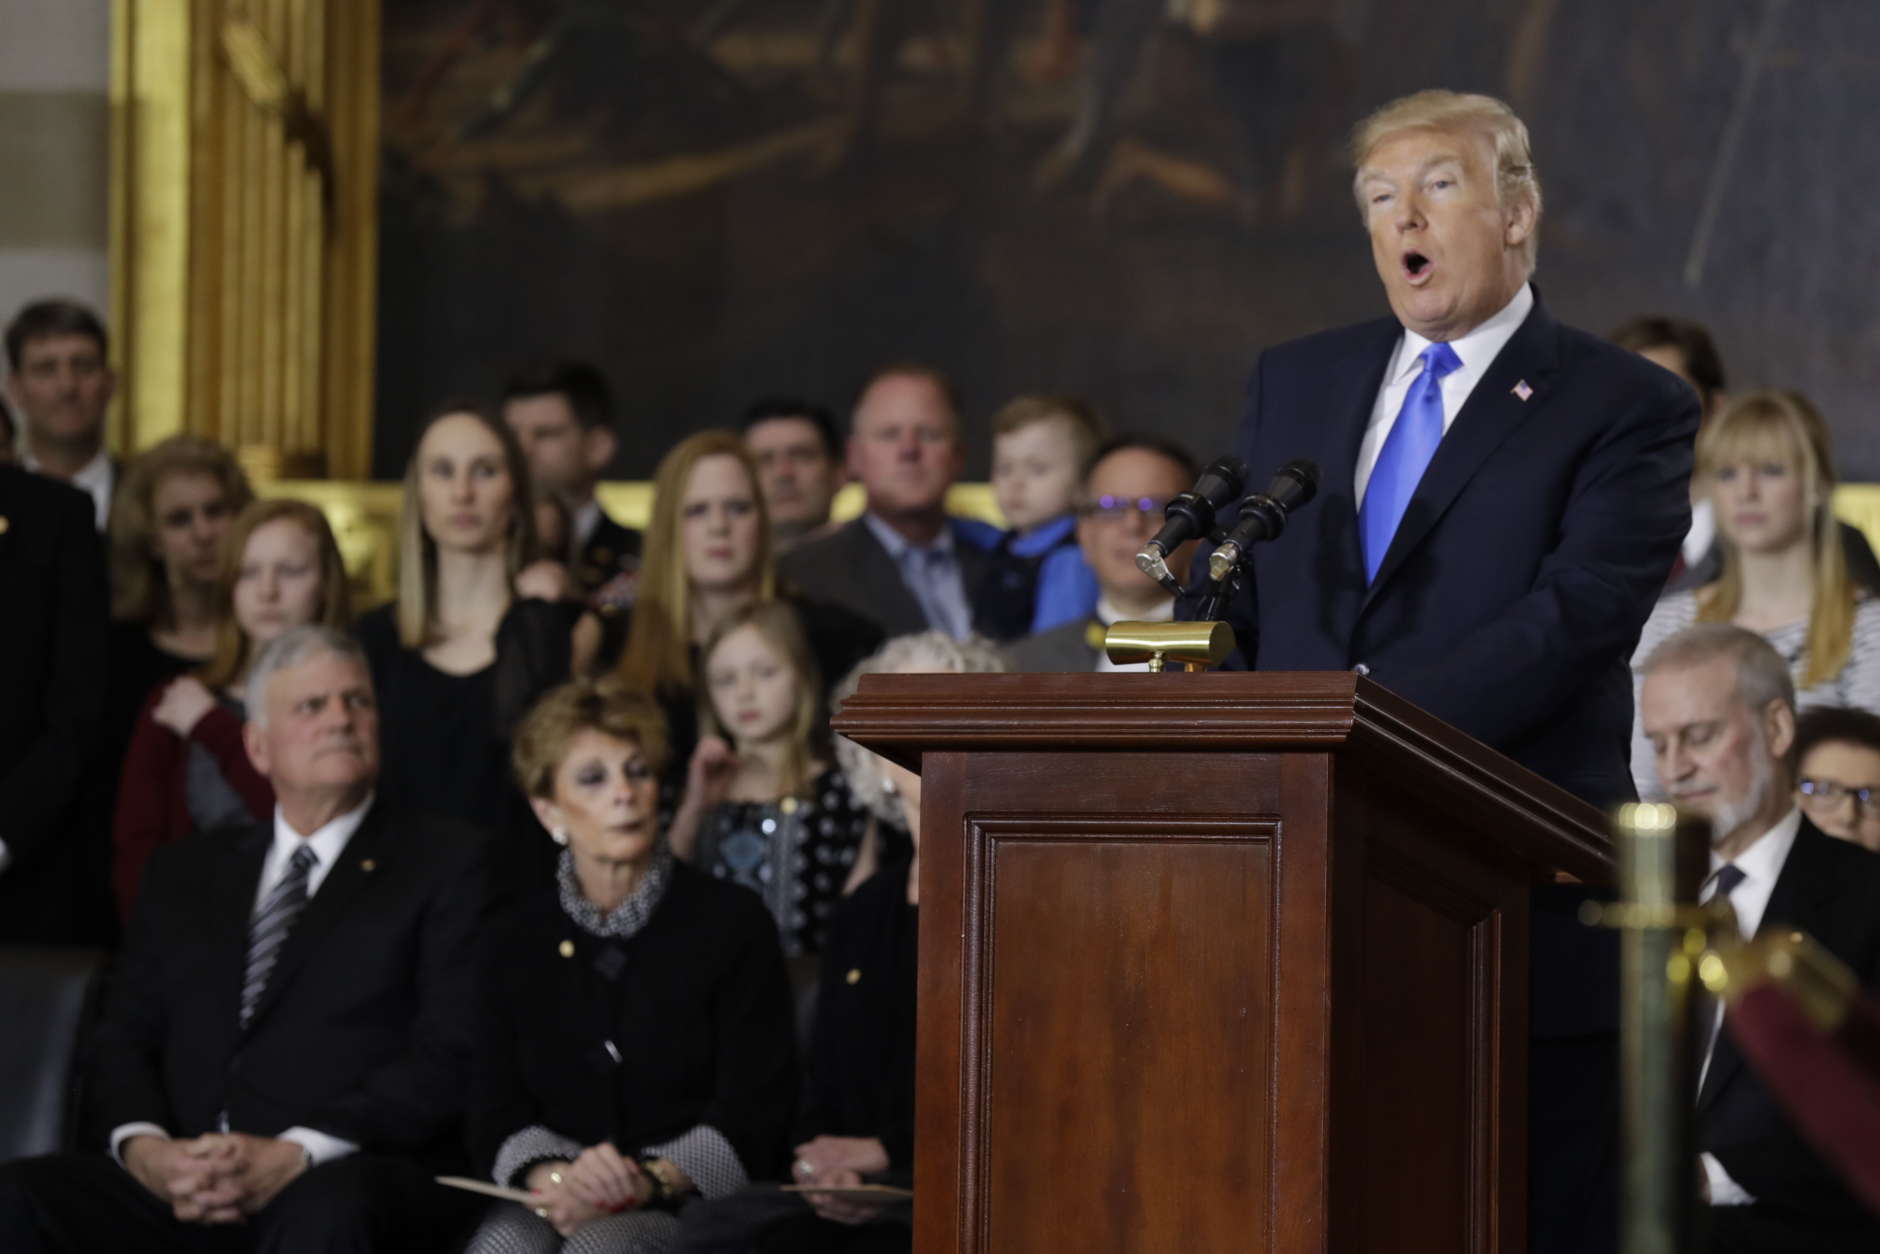 President Donald Trump participates in a ceremony honoring Reverend Billy Graham in the Rotunda of the U.S. Capitol building, Wednesday, Feb. 28, in Washington. (AP Photo/Evan Vucci)